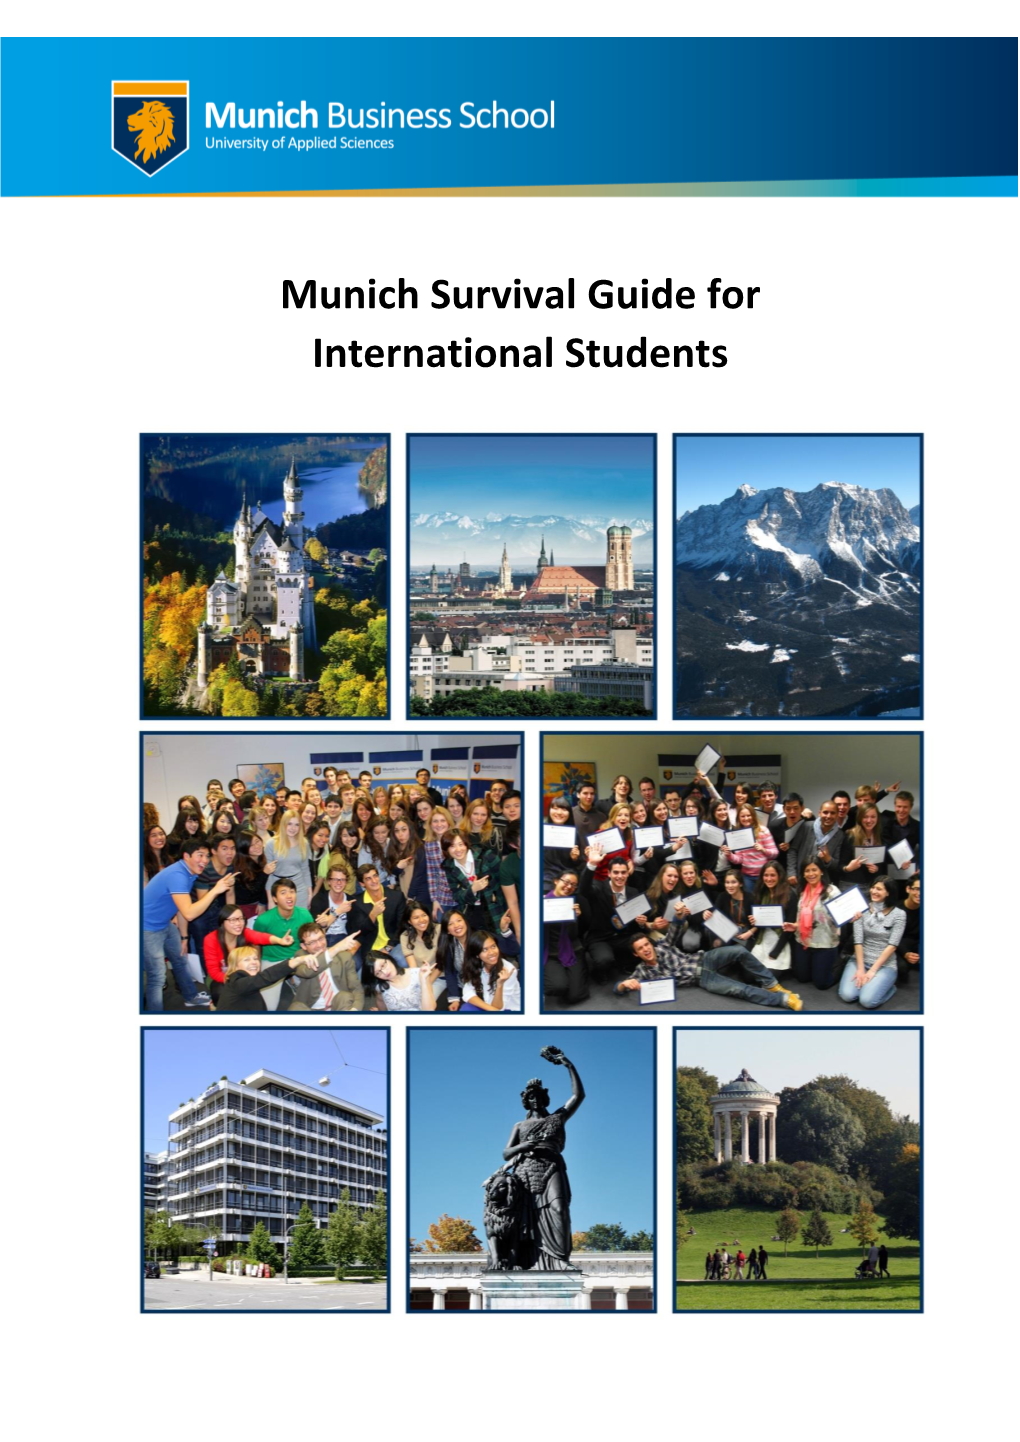 Munich Survival Guide for International Students